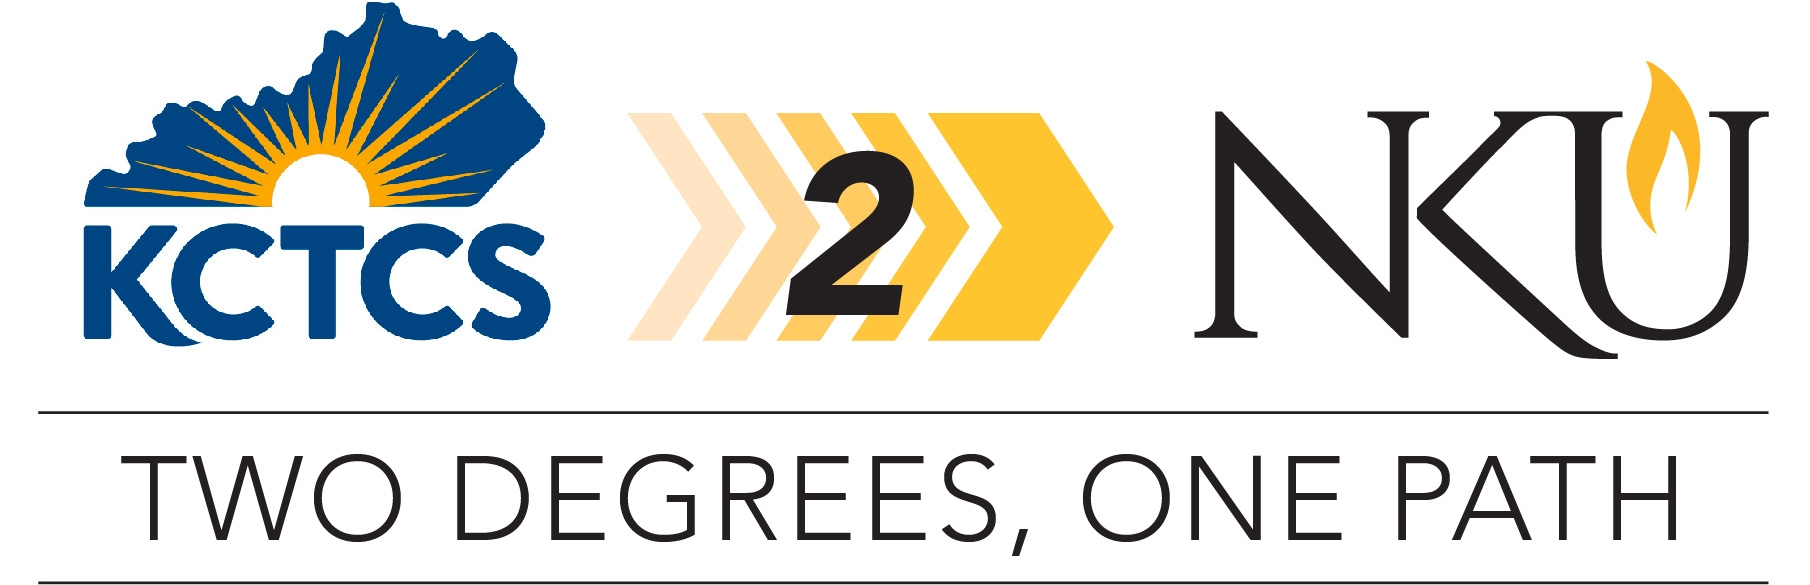 KCTCS to NKU - two degrees, one path